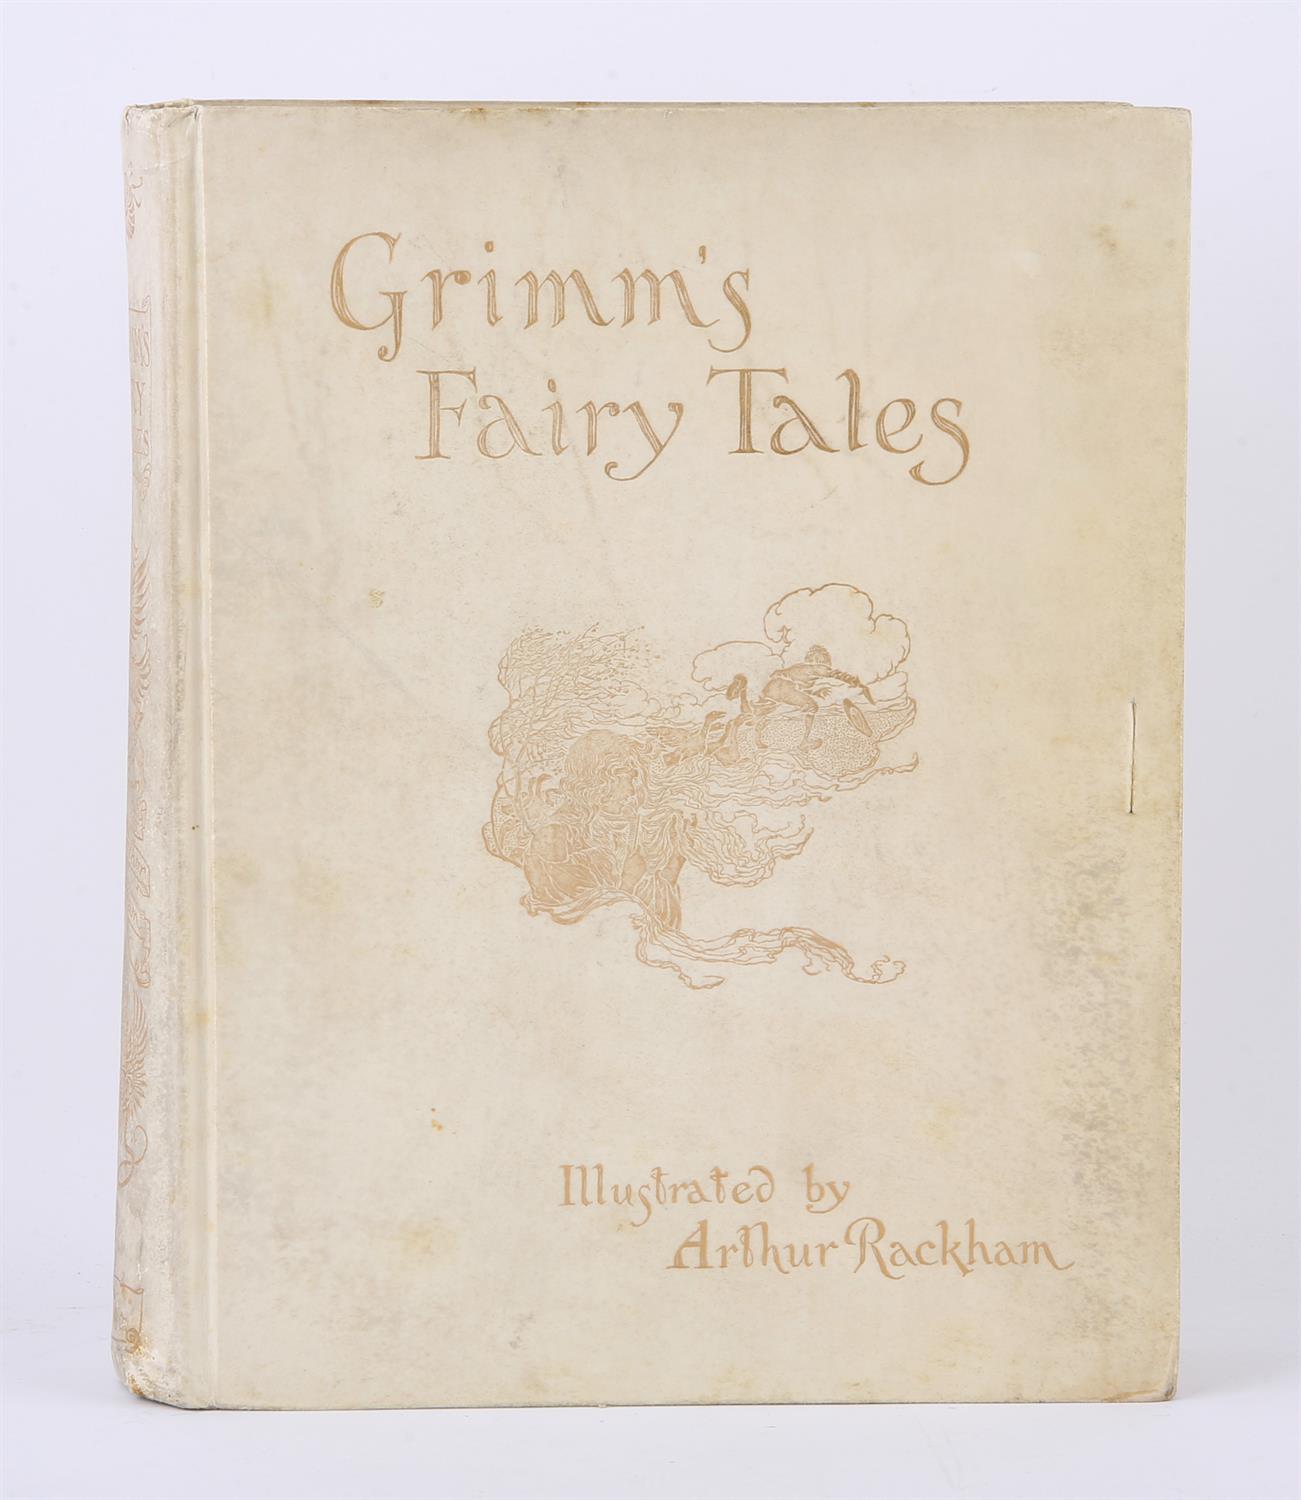 Rackham, Arthur, 'The Fairy Tales of the Brothers Grimm', translated by Mrs. Edgar Lucas, London,